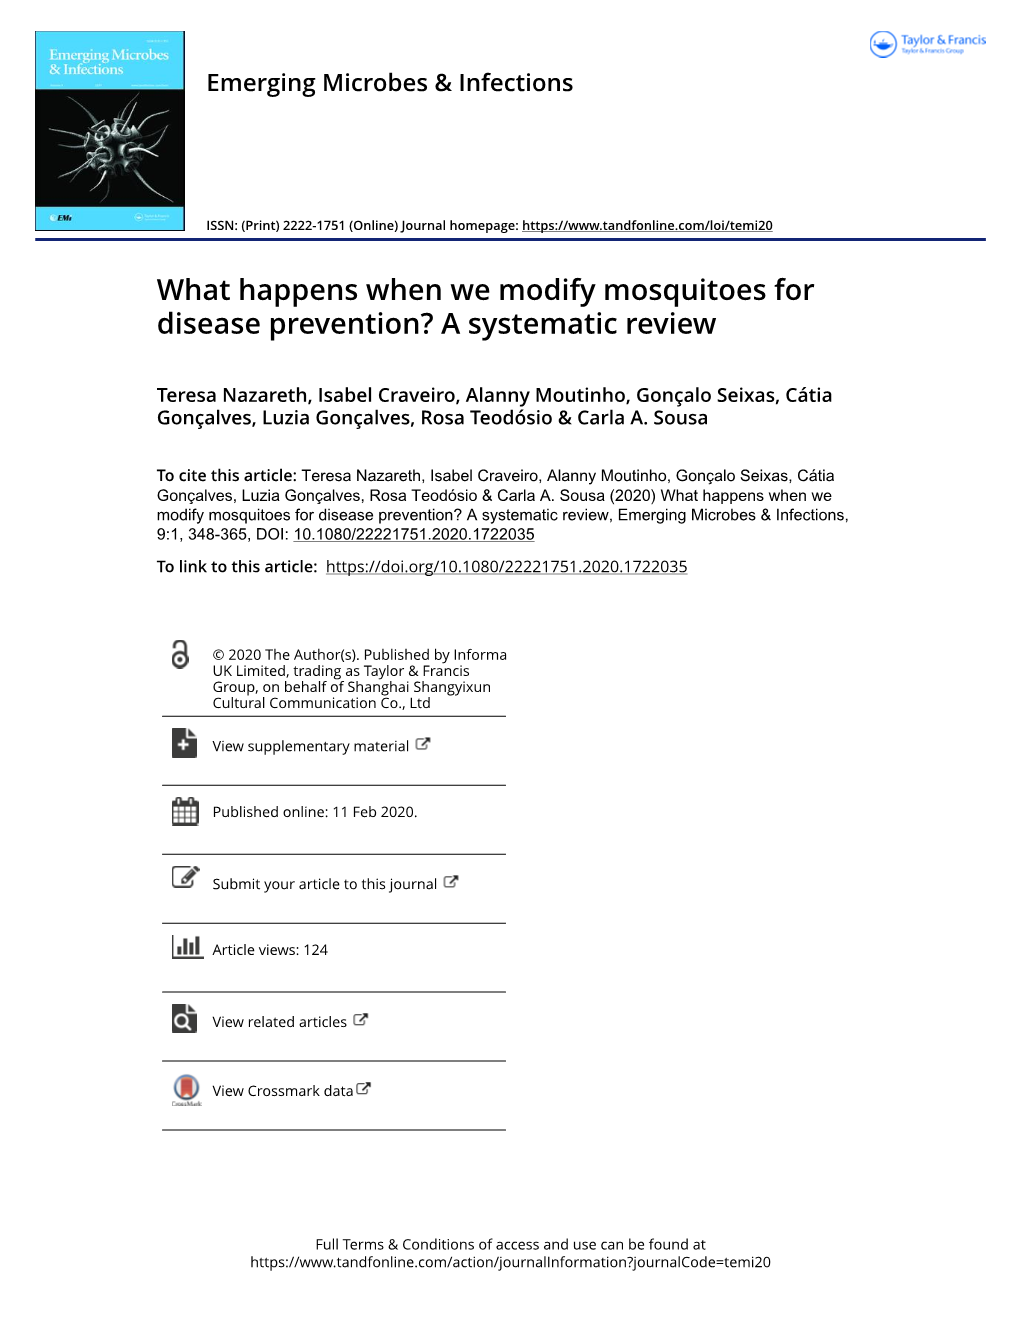 What Happens When We Modify Mosquitoes for Disease Prevention? a Systematic Review